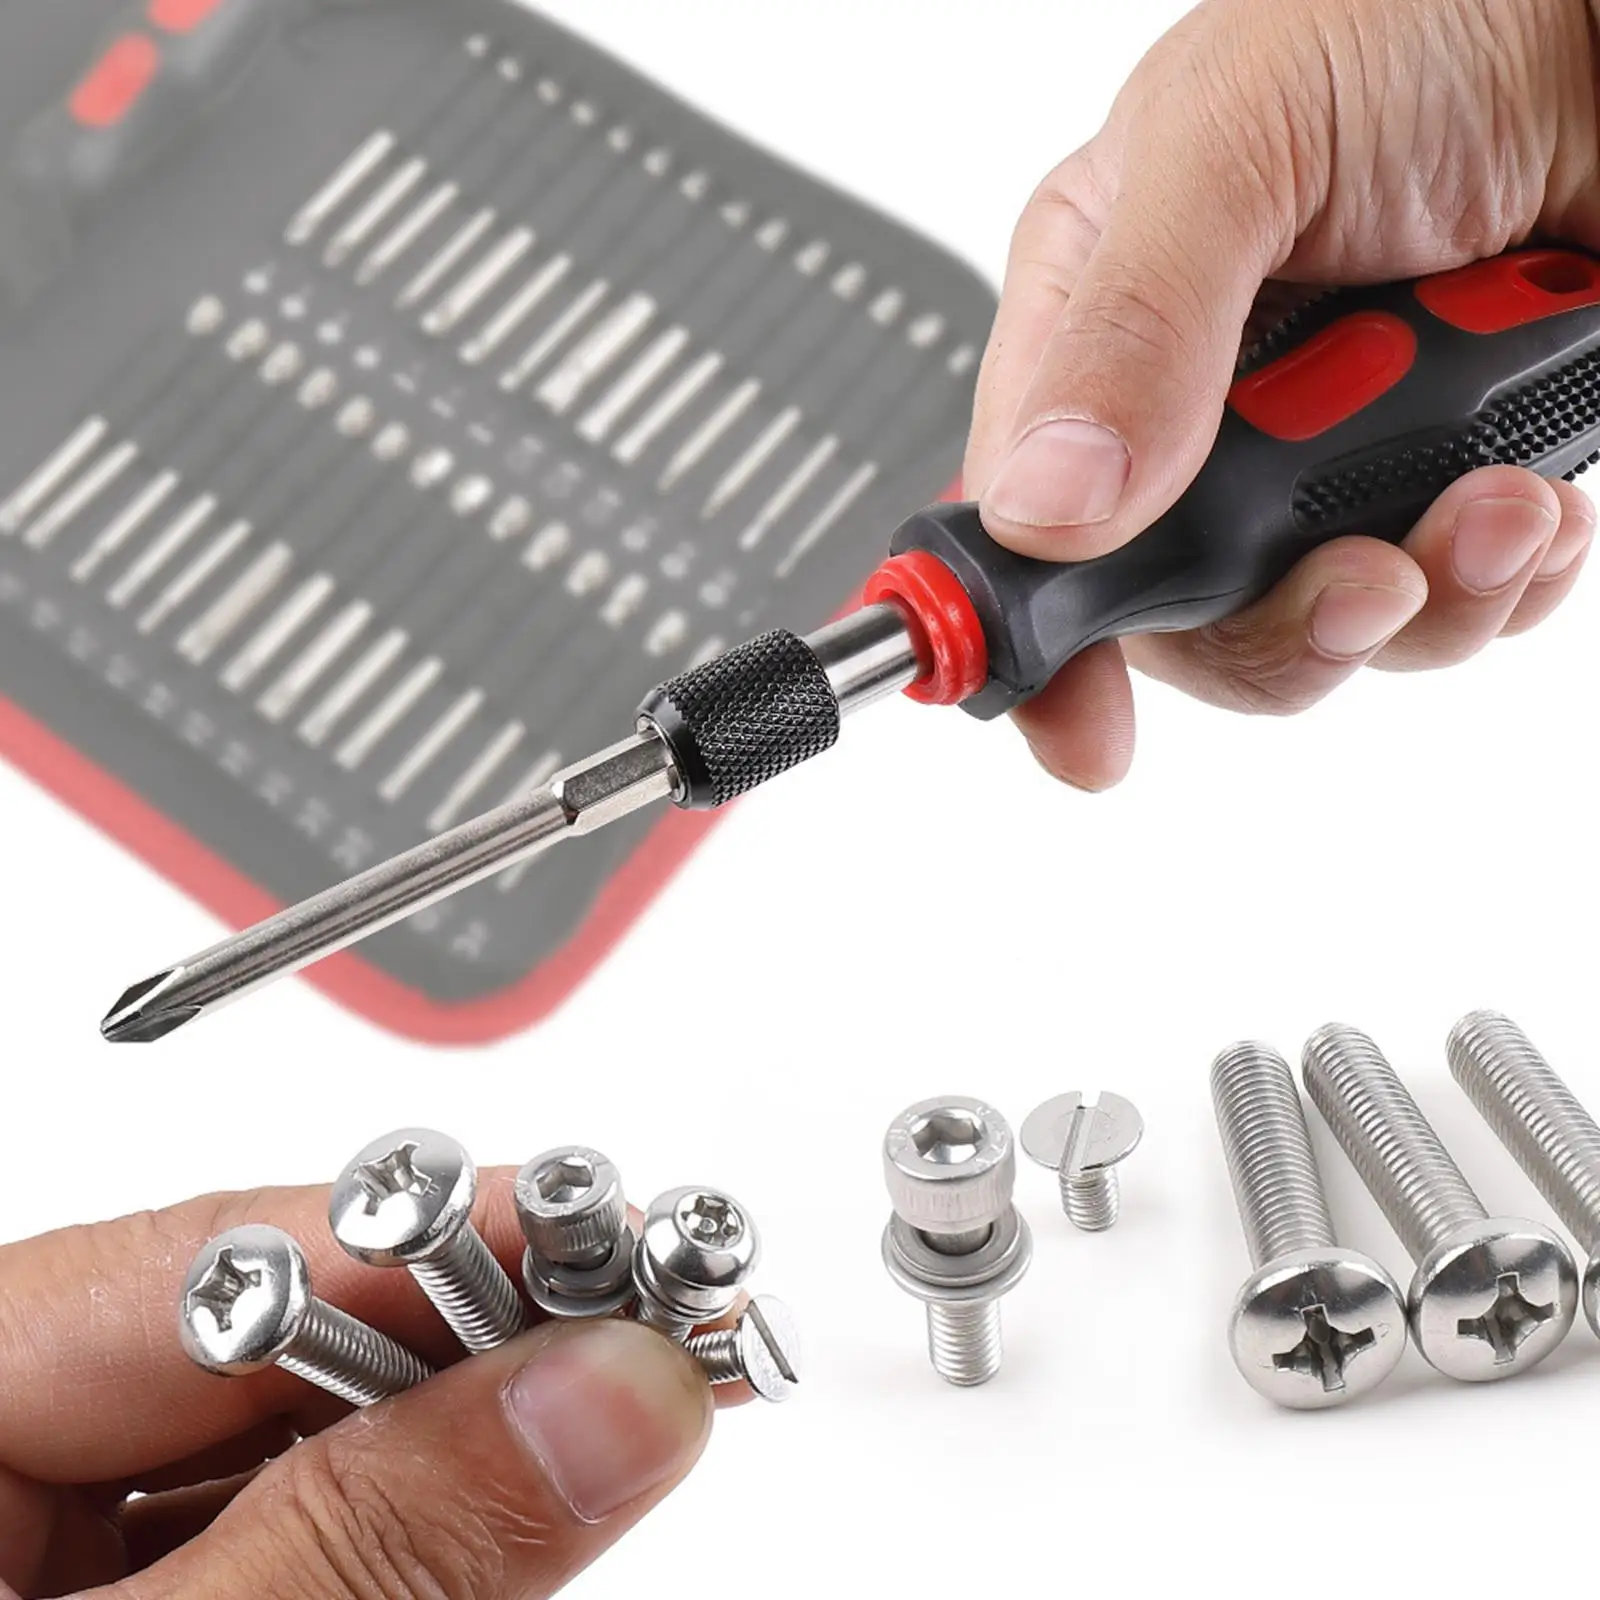 55 Pieces Handy Mini Electric Screwdrivers with 55 Precision Bits Repair Tool Kit Cordless Power Screwdriver Set for Phone Watch